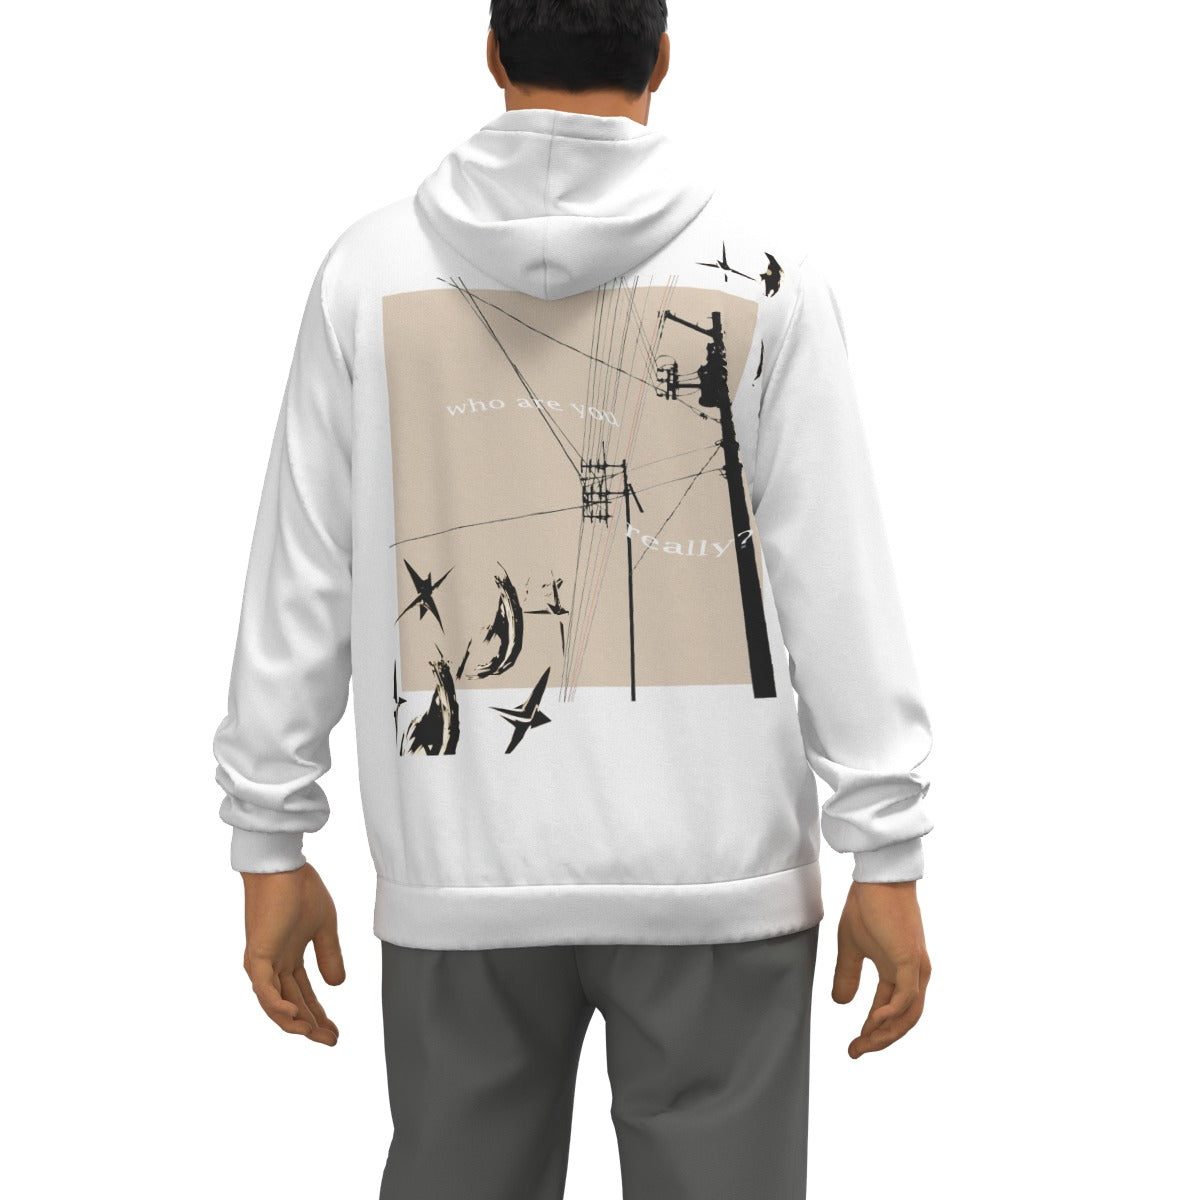 "who are you really" - hoodie, design1